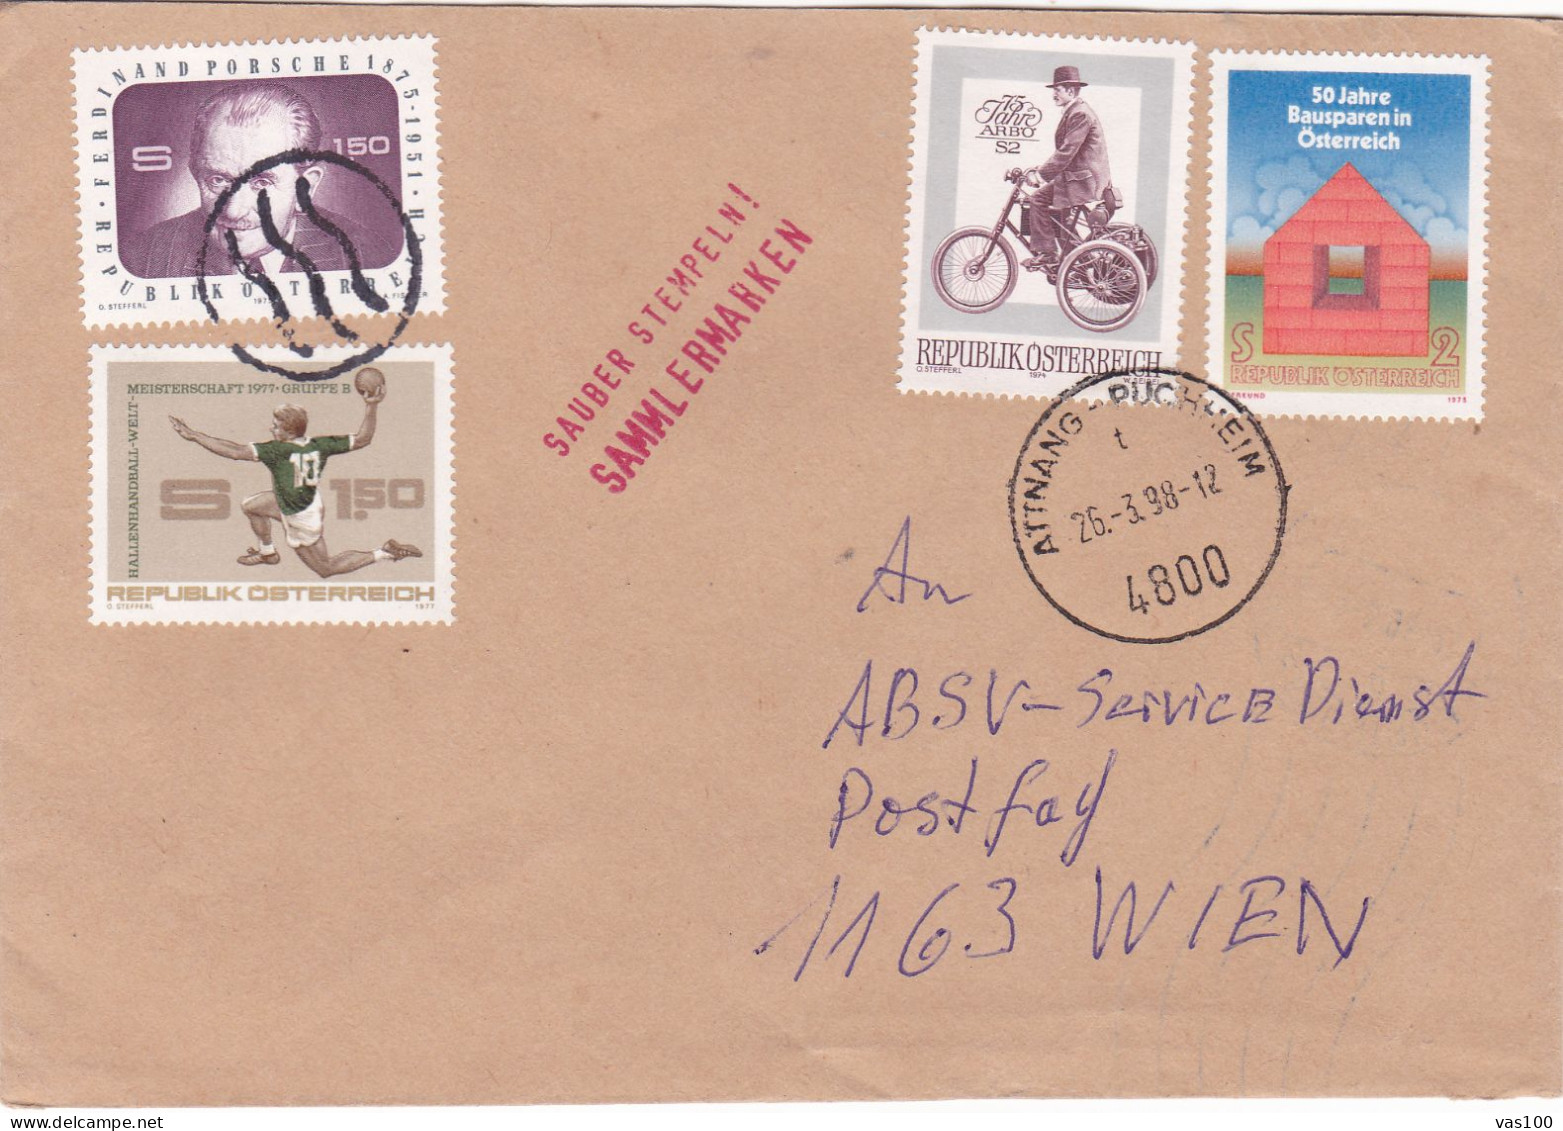 BICYCLE BEAUTIFUL STAMPED ENVELOPE  COVERS 1998  AUSTRIA - Covers & Documents